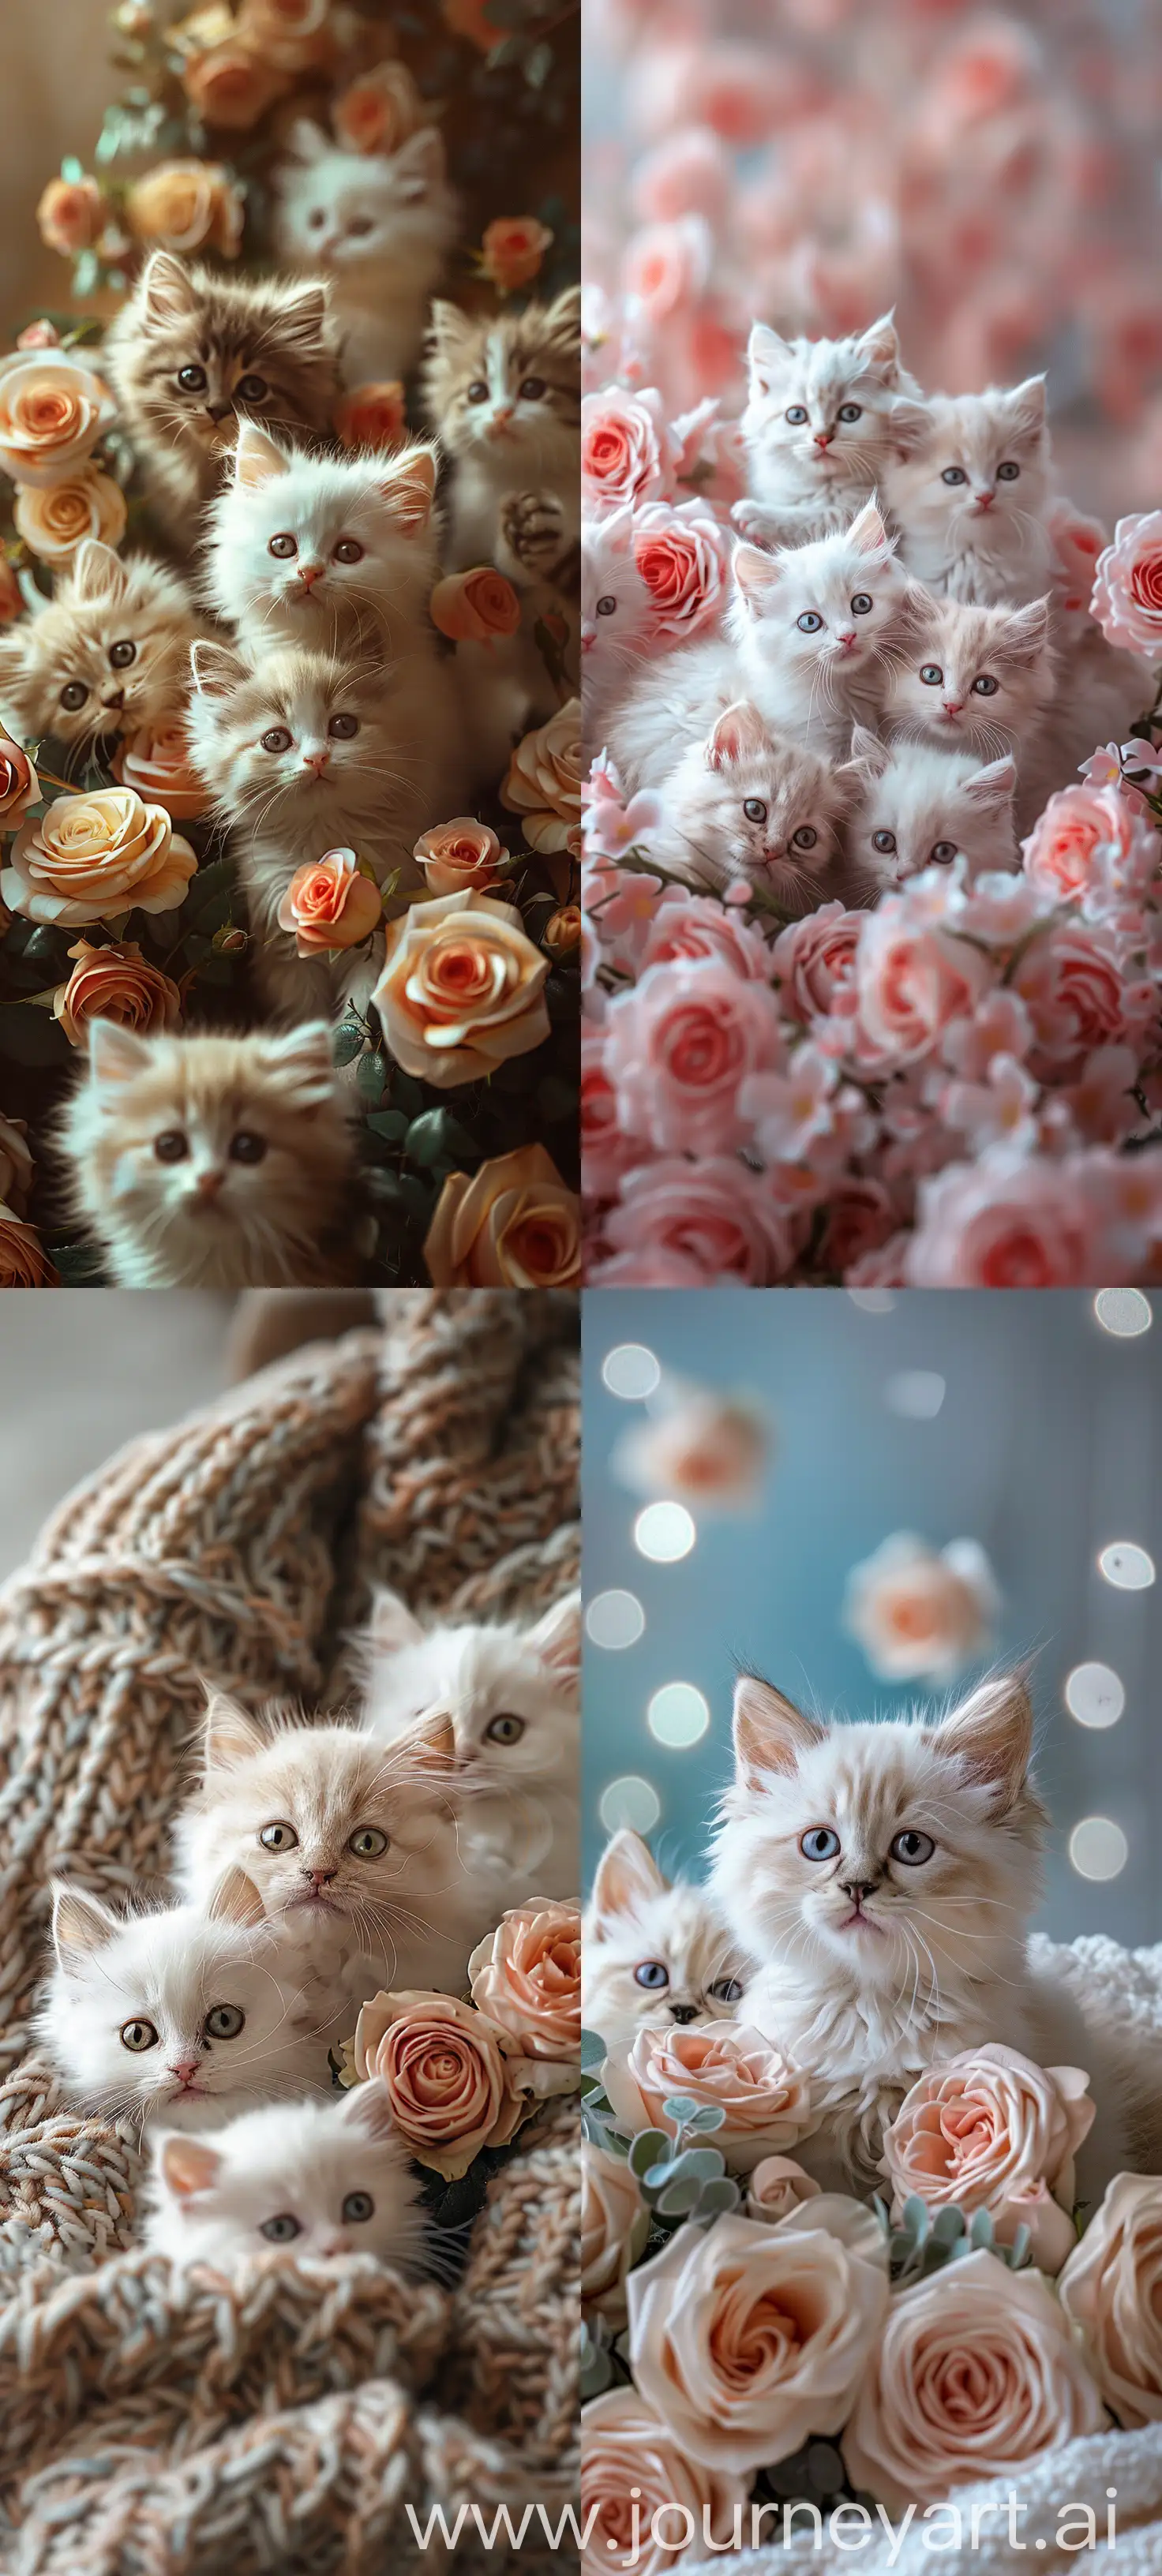 Whimsical-White-Kittens-and-Roses-Bouquet-in-Spring-Bliss